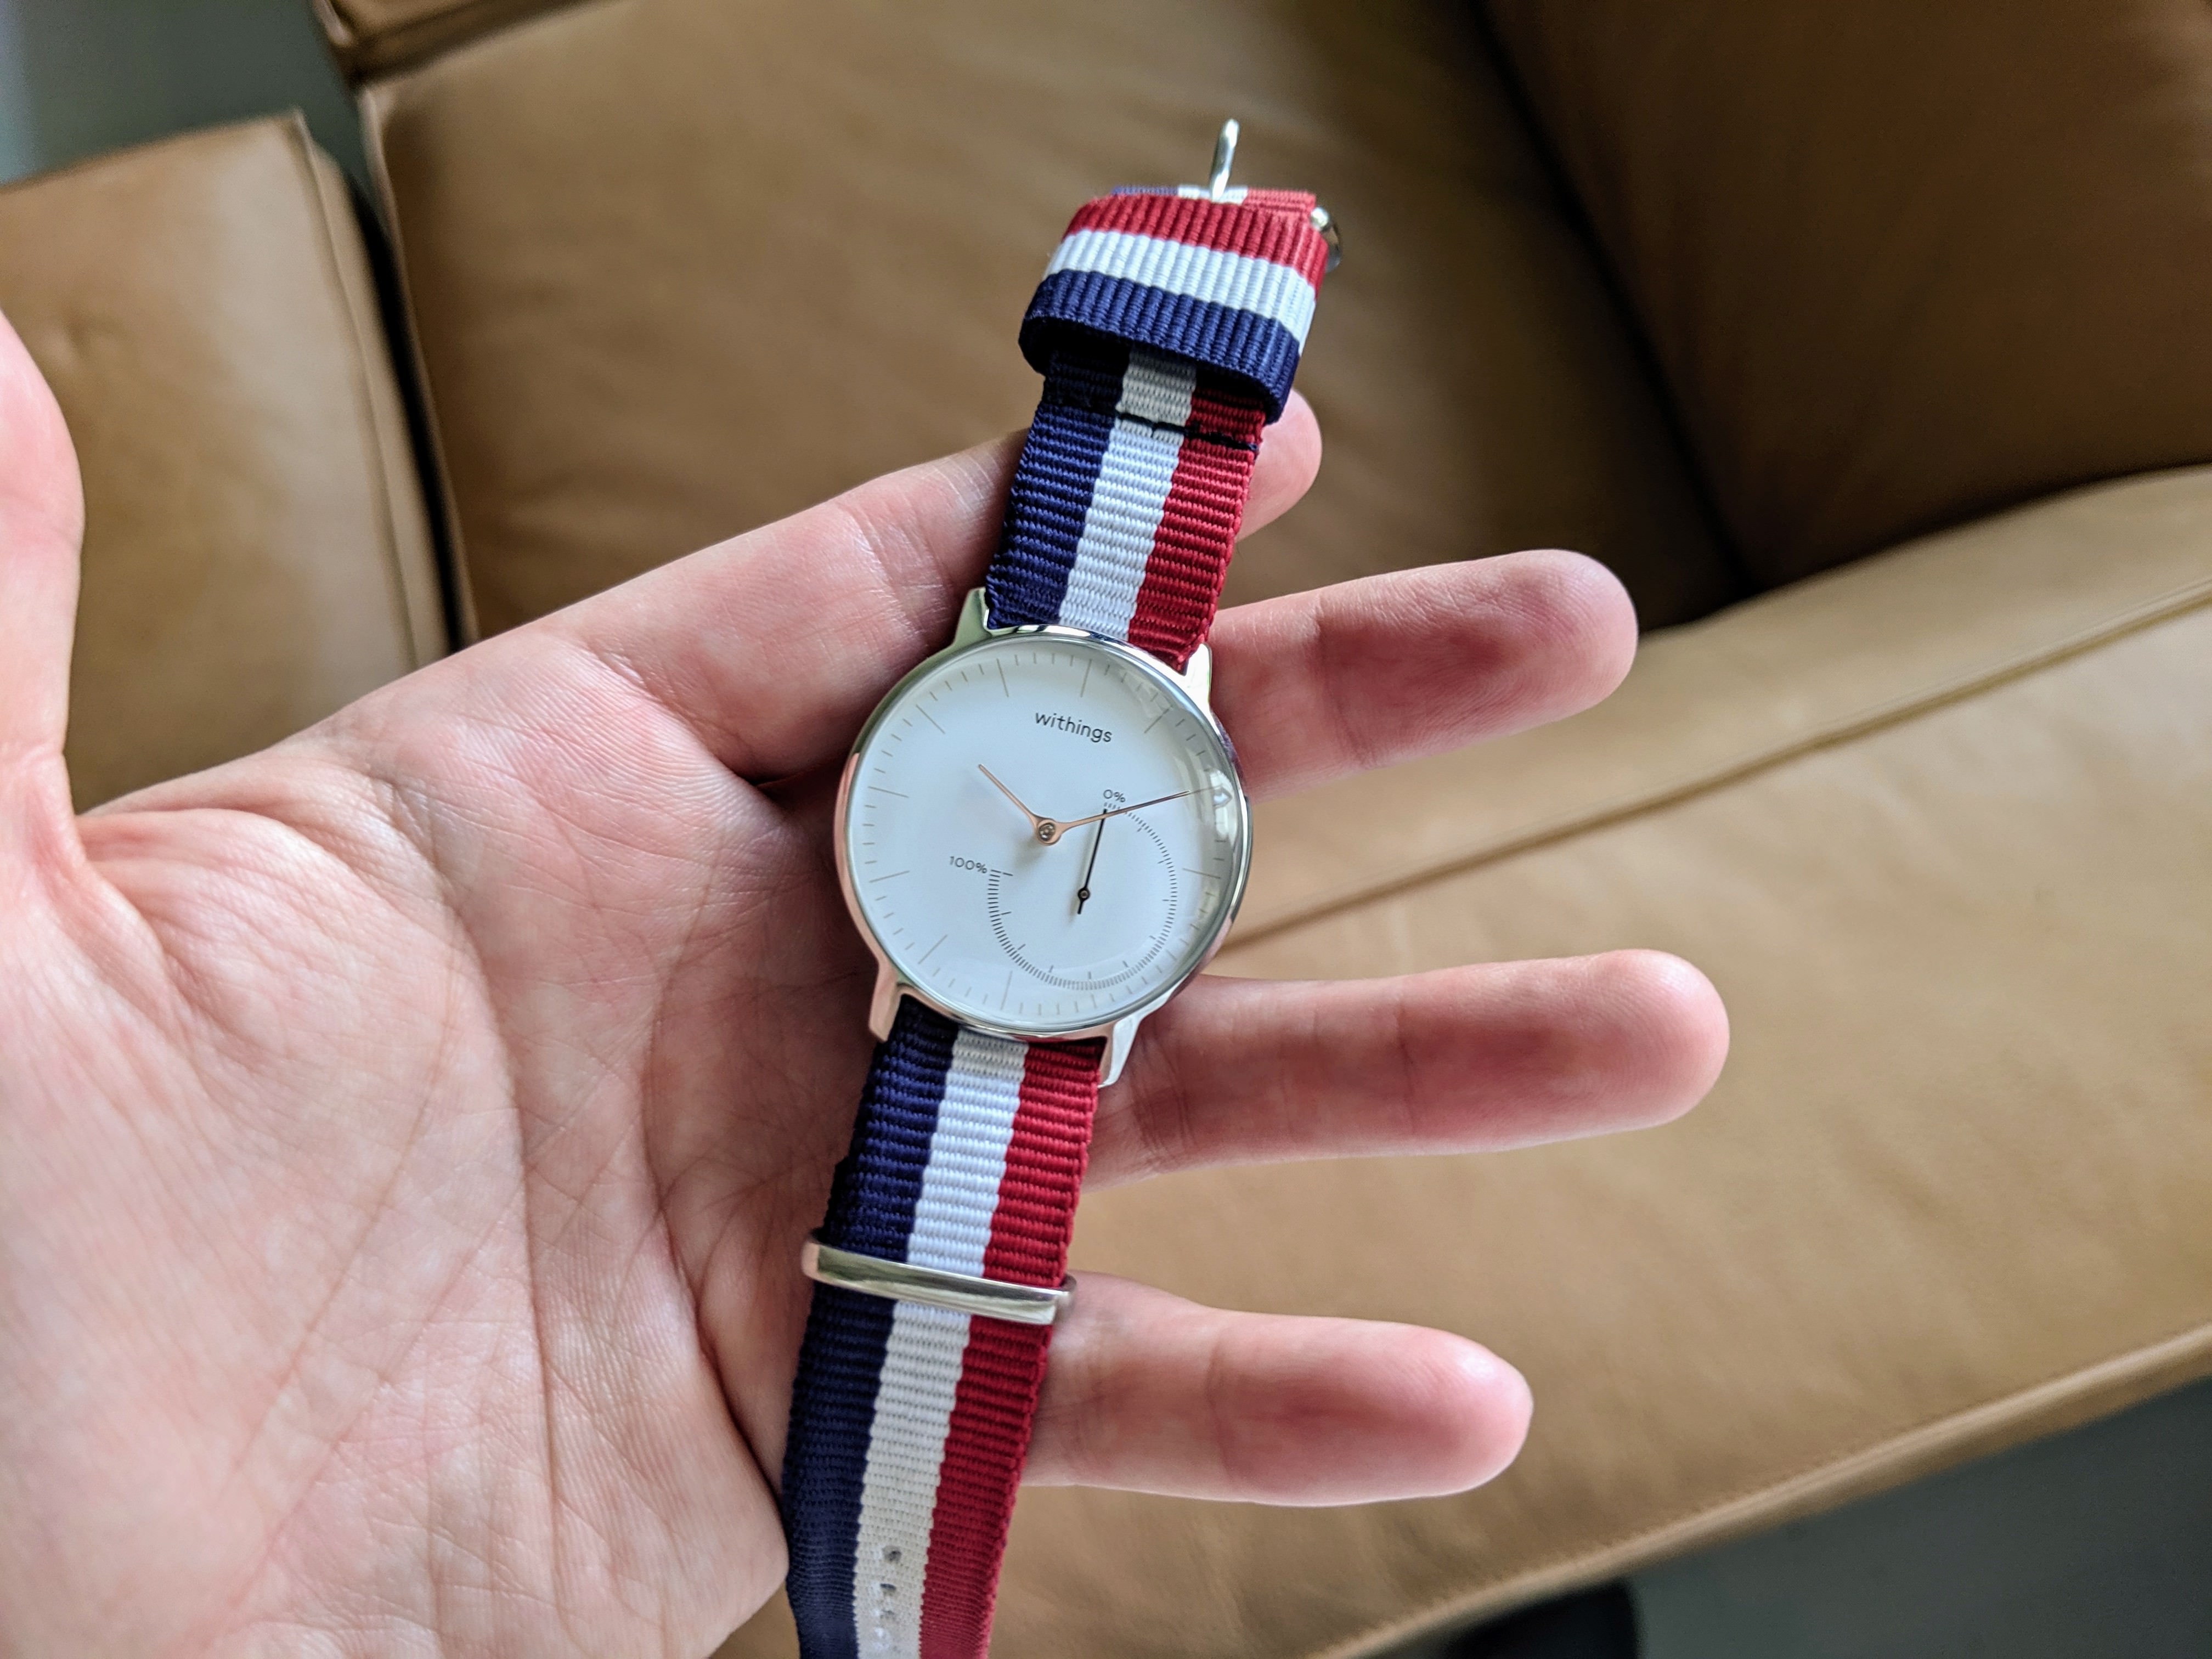 Replacing the Withings Steel Strap Product NATO with - - Band Notes a Reviews